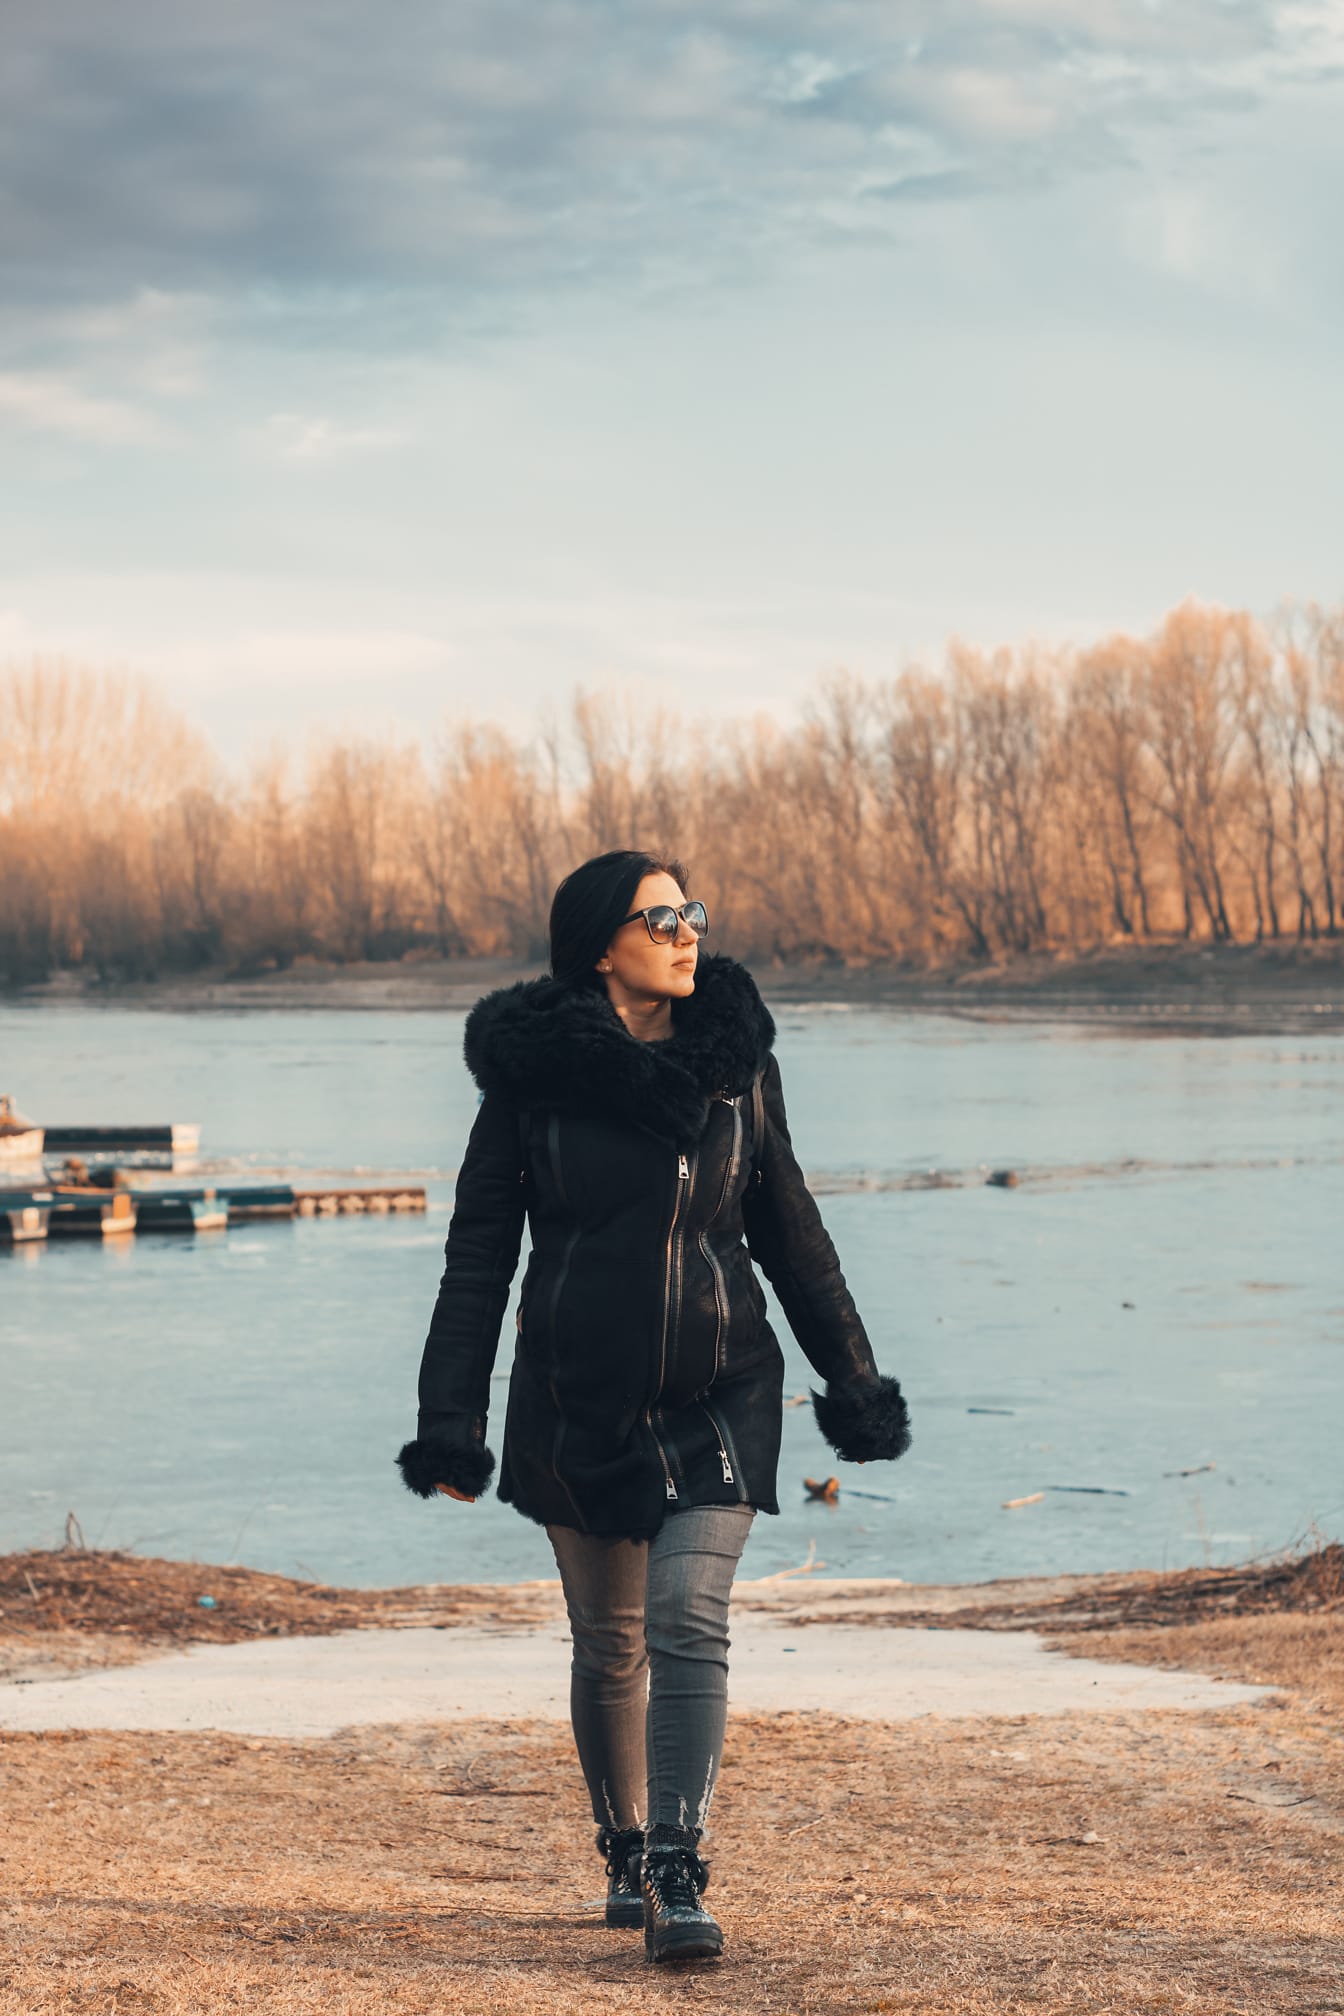 Young woman in winter coat and sunglasses walking on coast of frozen lake